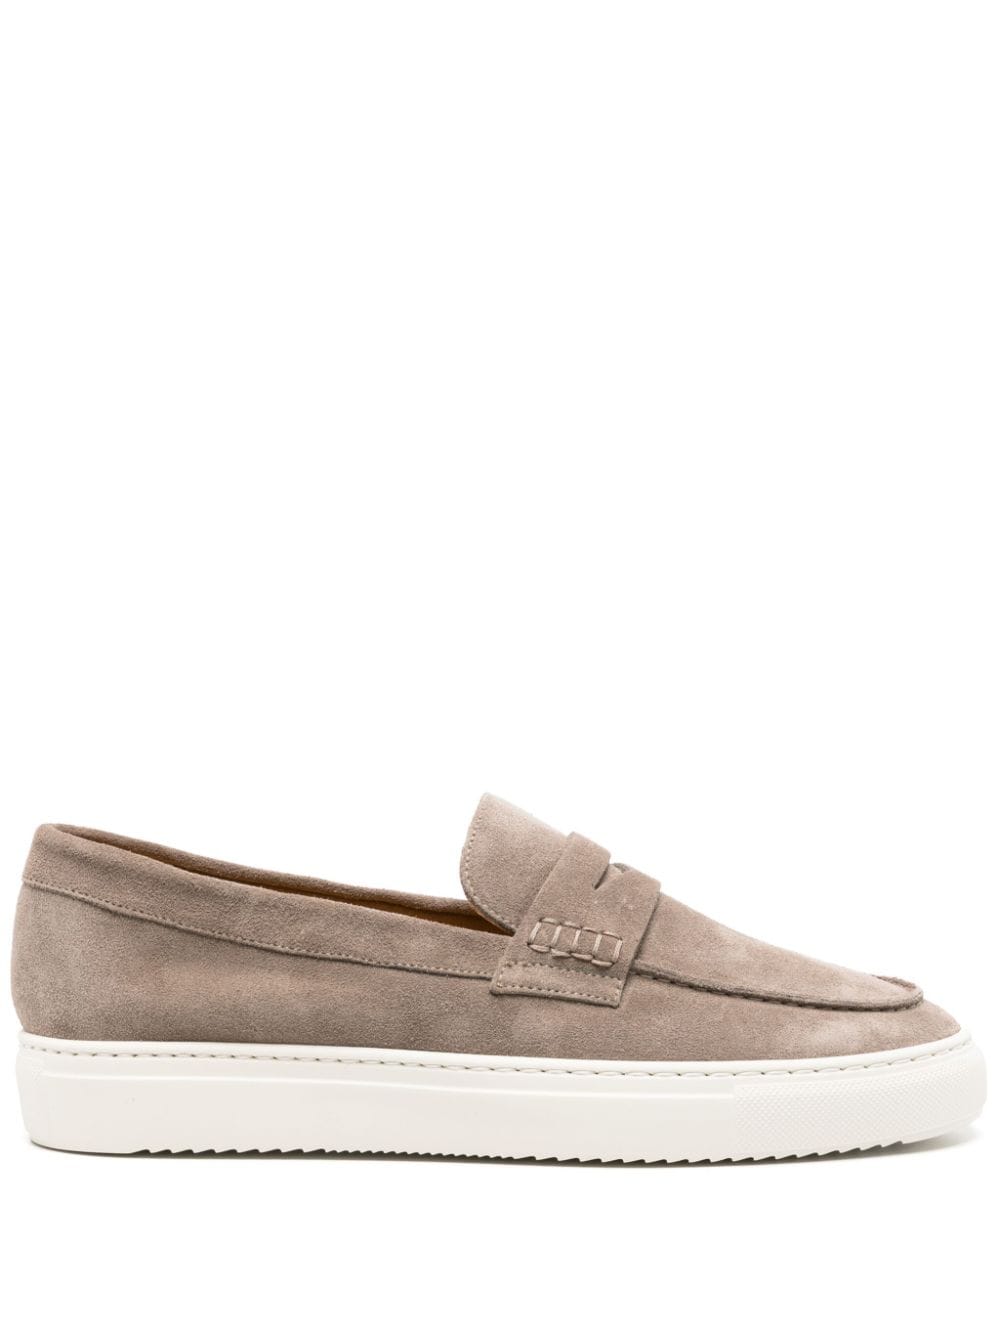 Doucal's Suede Penny Loafers In Neutrals